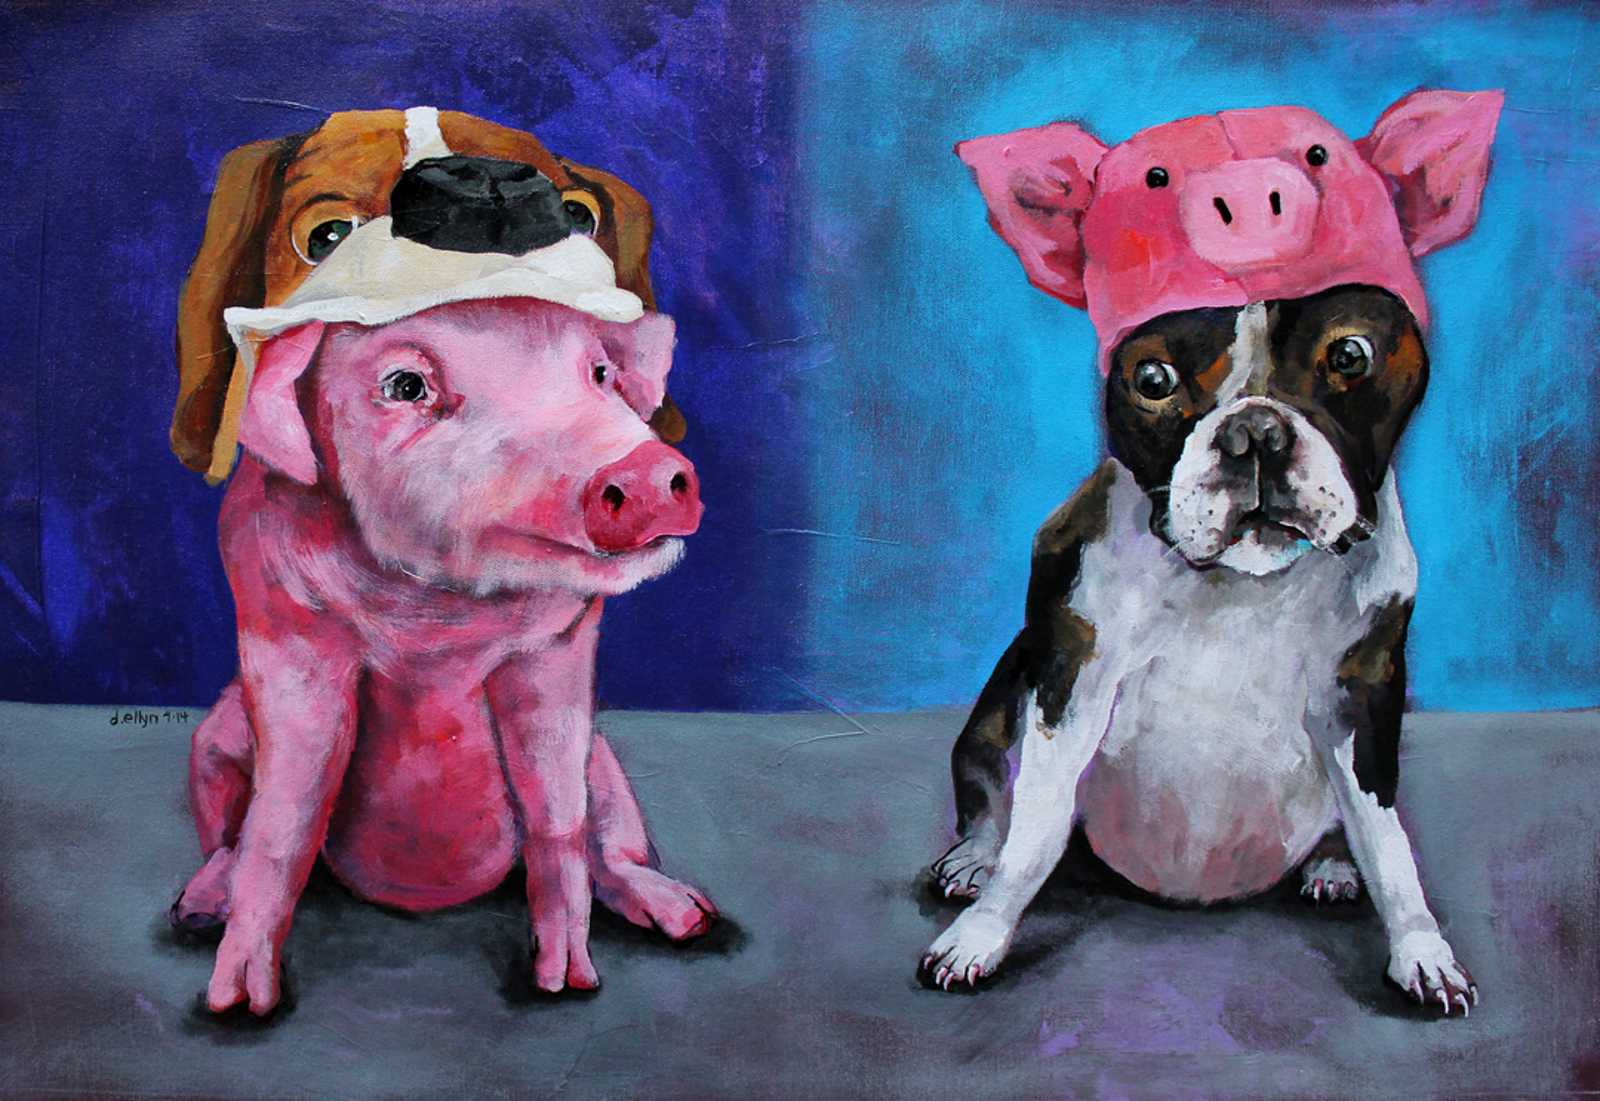 These Thought-Provoking Paintings Will Make You See Farmed Animals in a Whole New Light (PHOTOS)